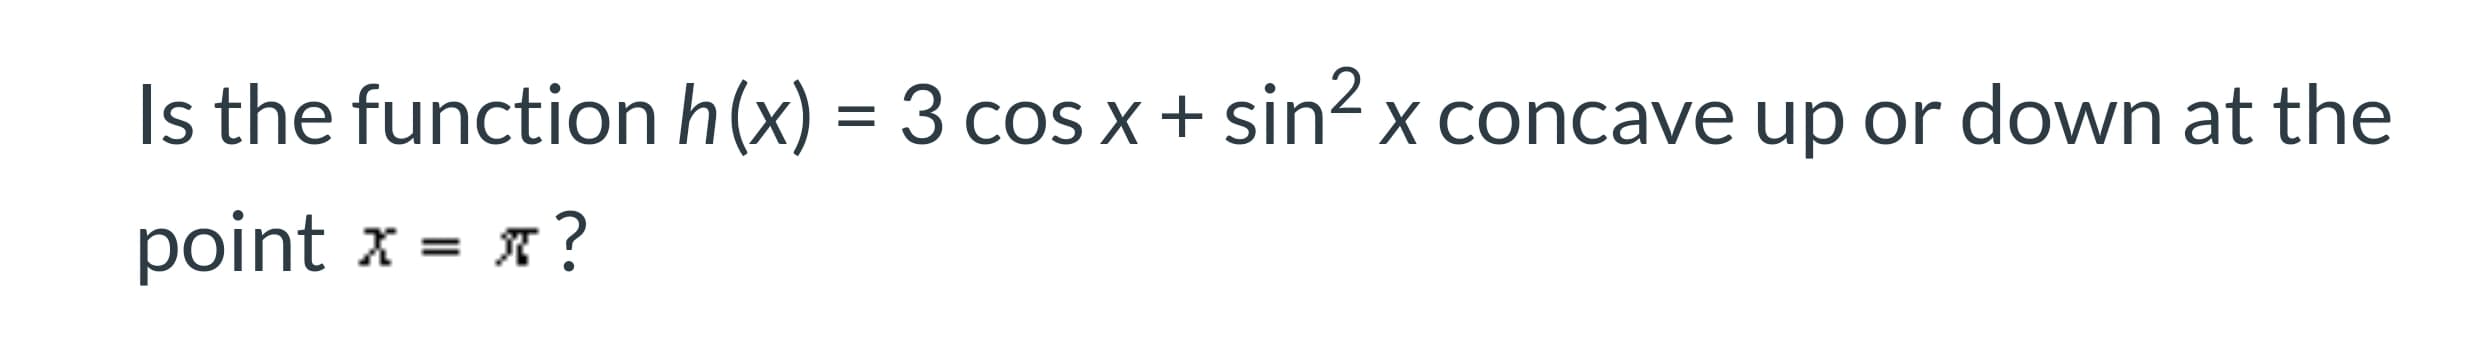 Is the function h(x) = 3 cos x+ sin x concave up or down at the
point
3 я?
